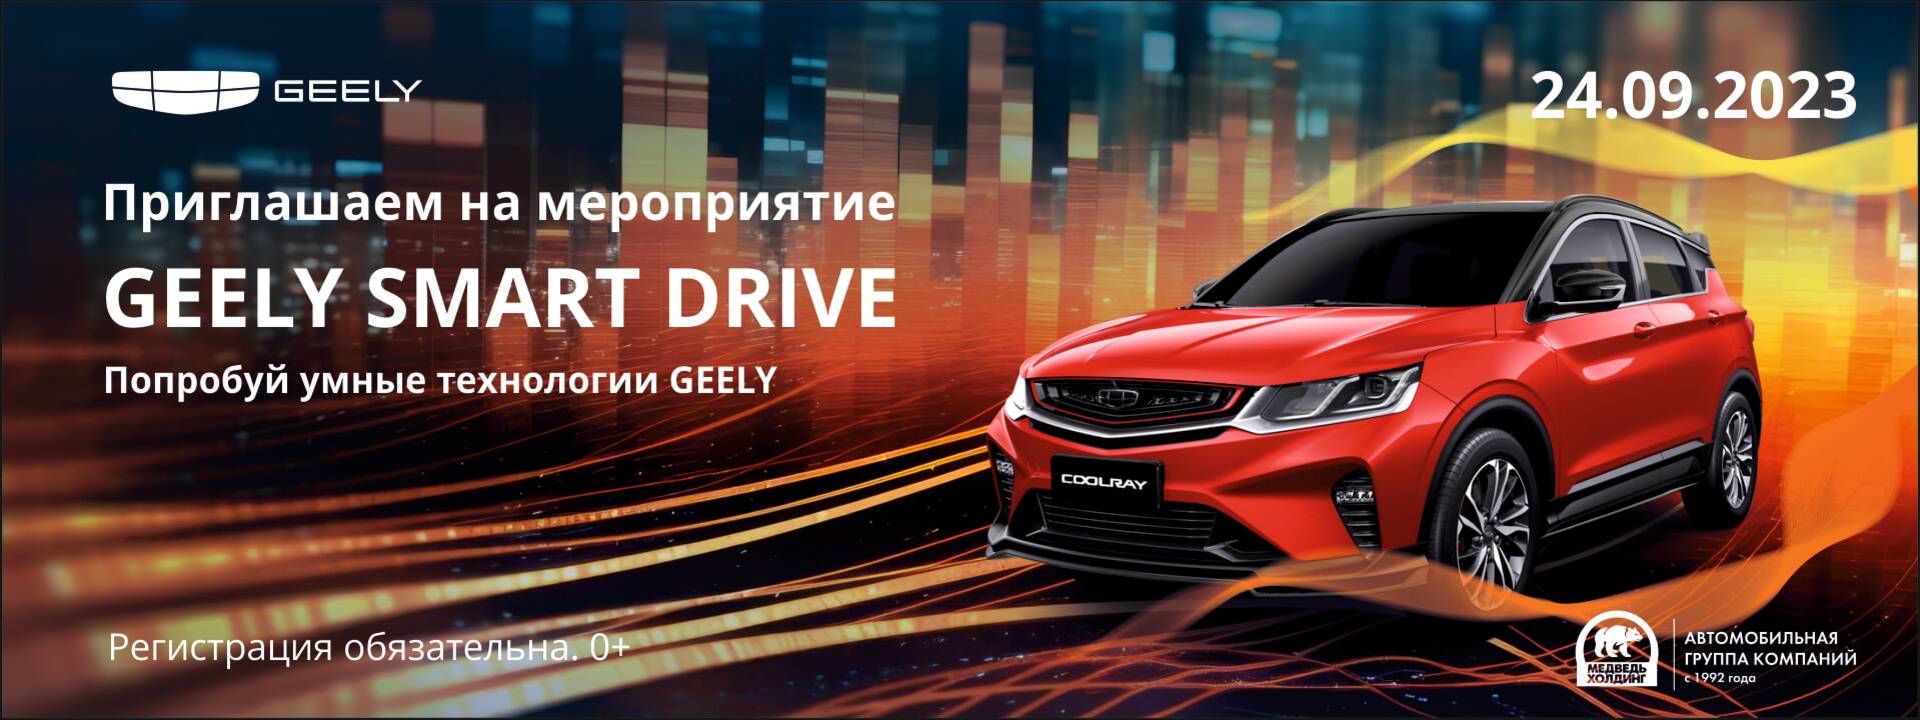 Geely Smart Drive